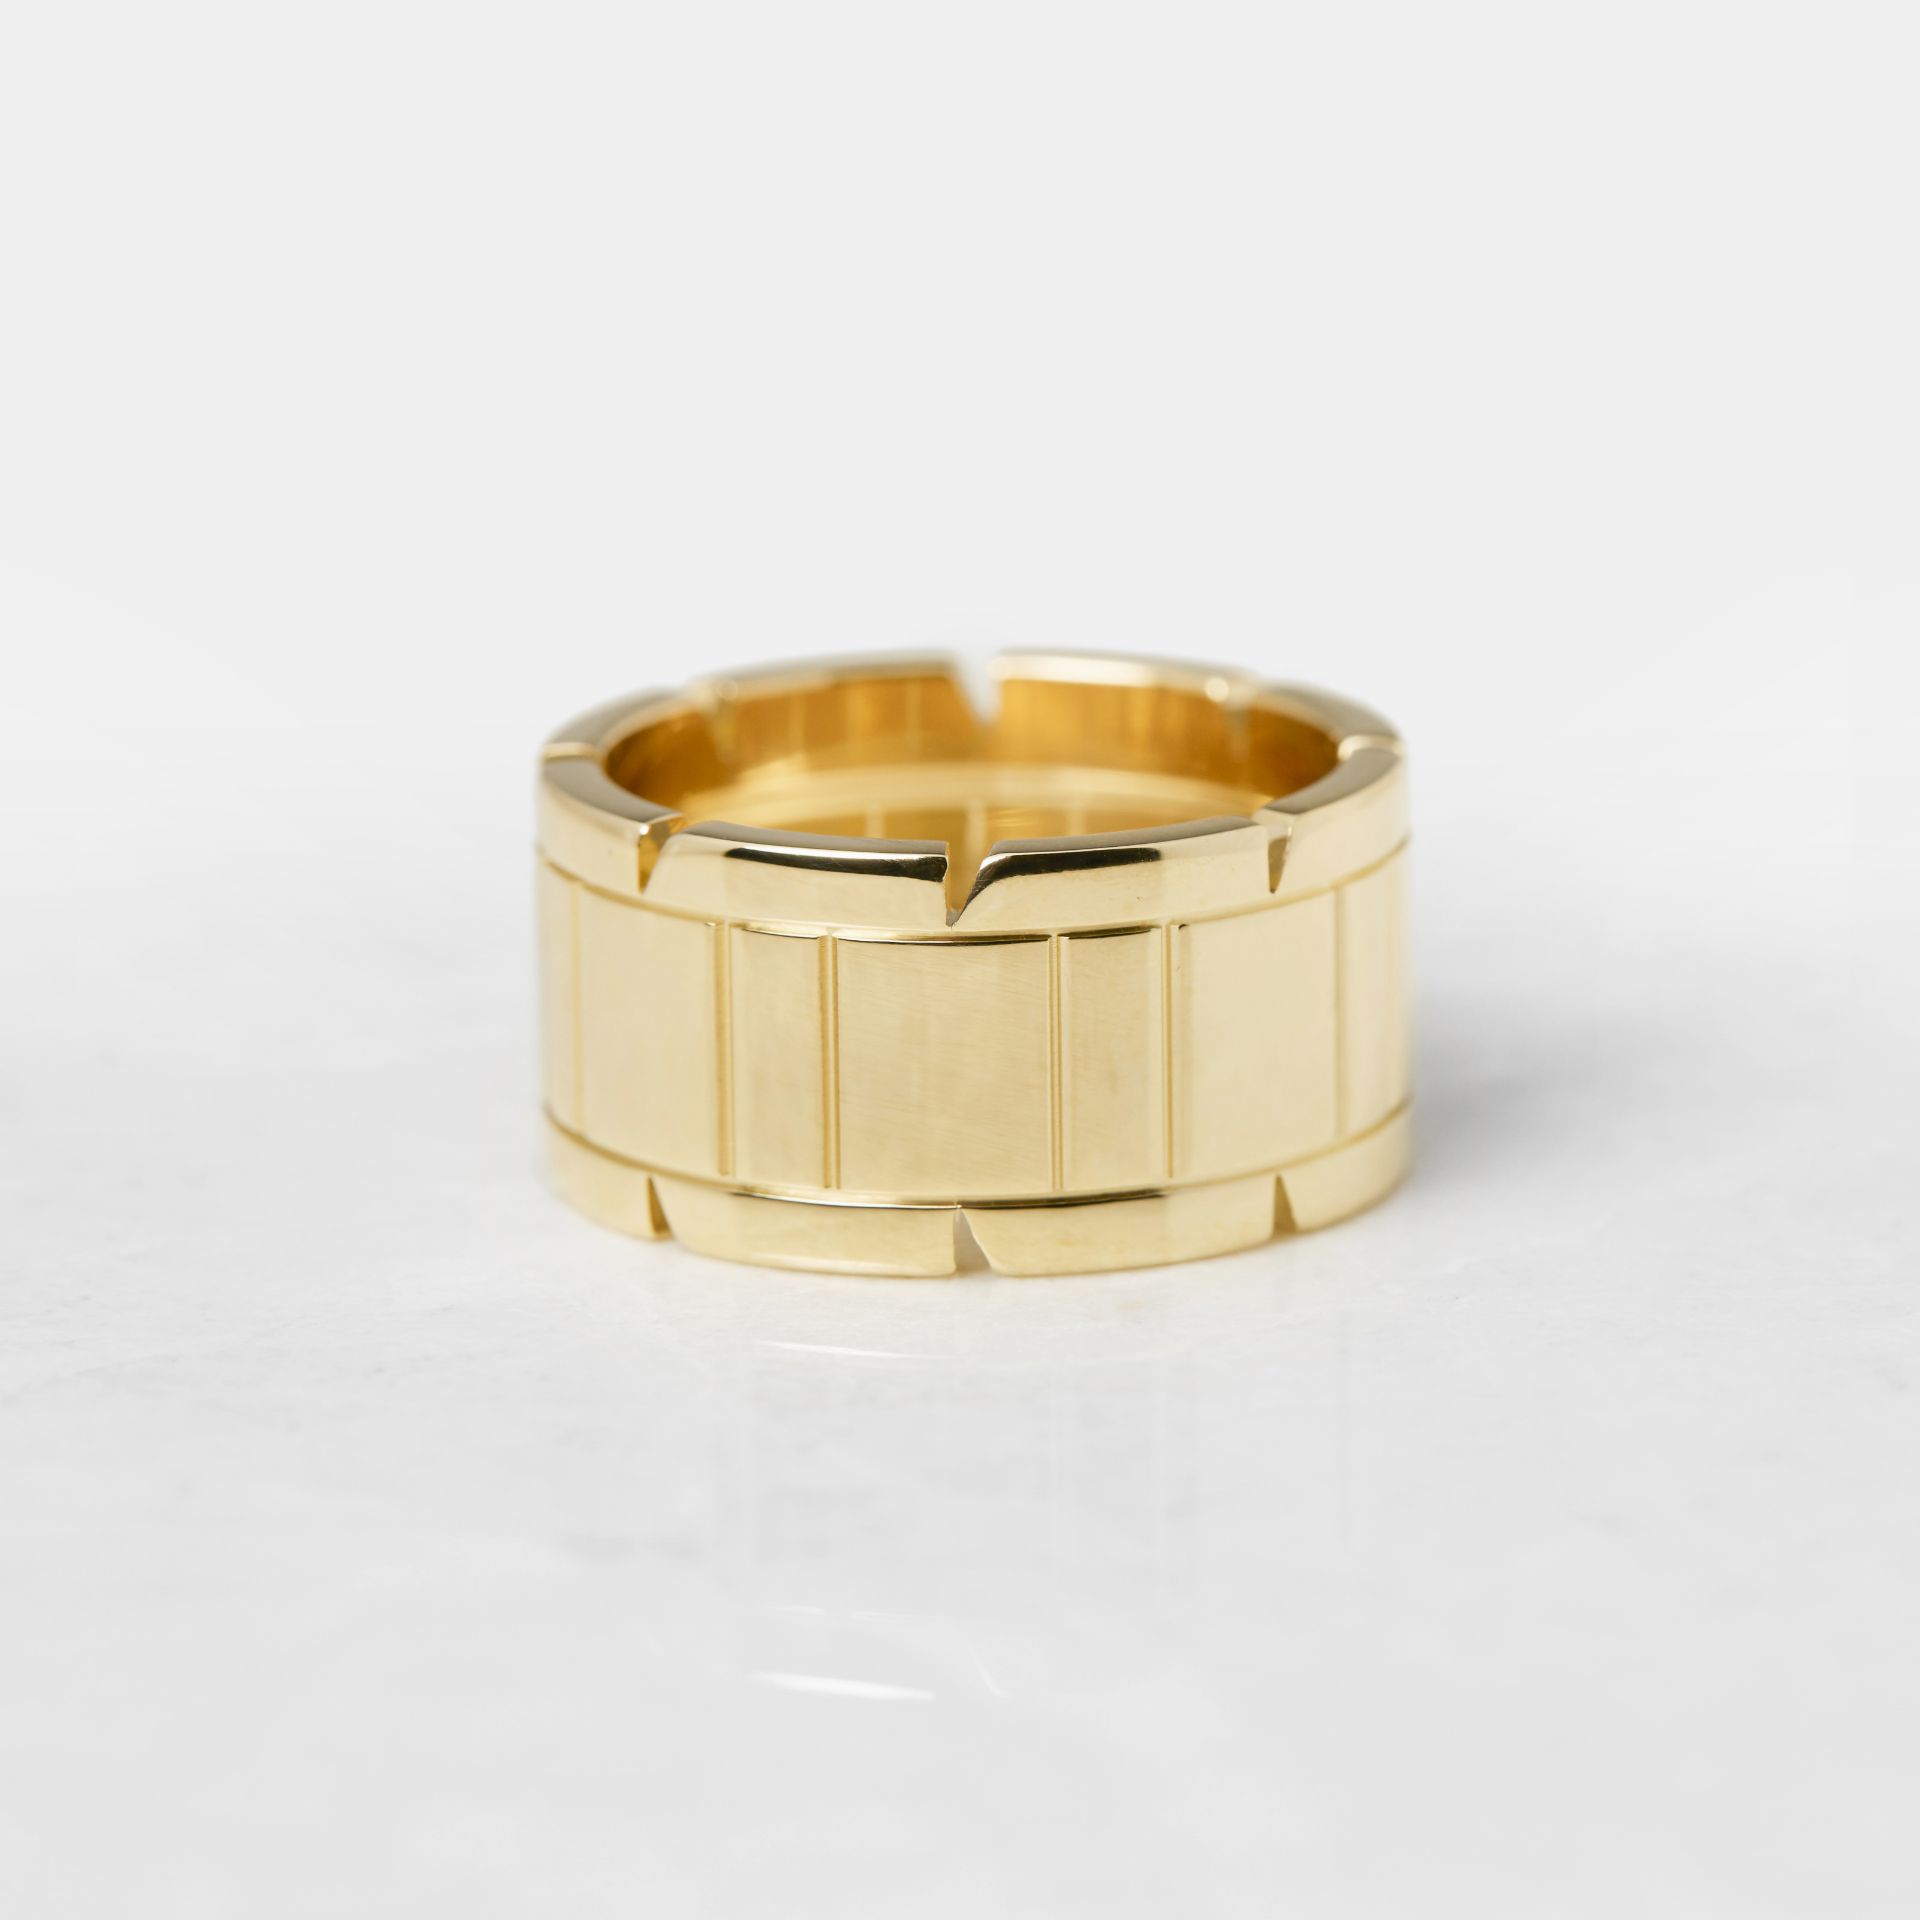 Cartier 18k Yellow Gold Tank Francaise Ring - Image 7 of 8